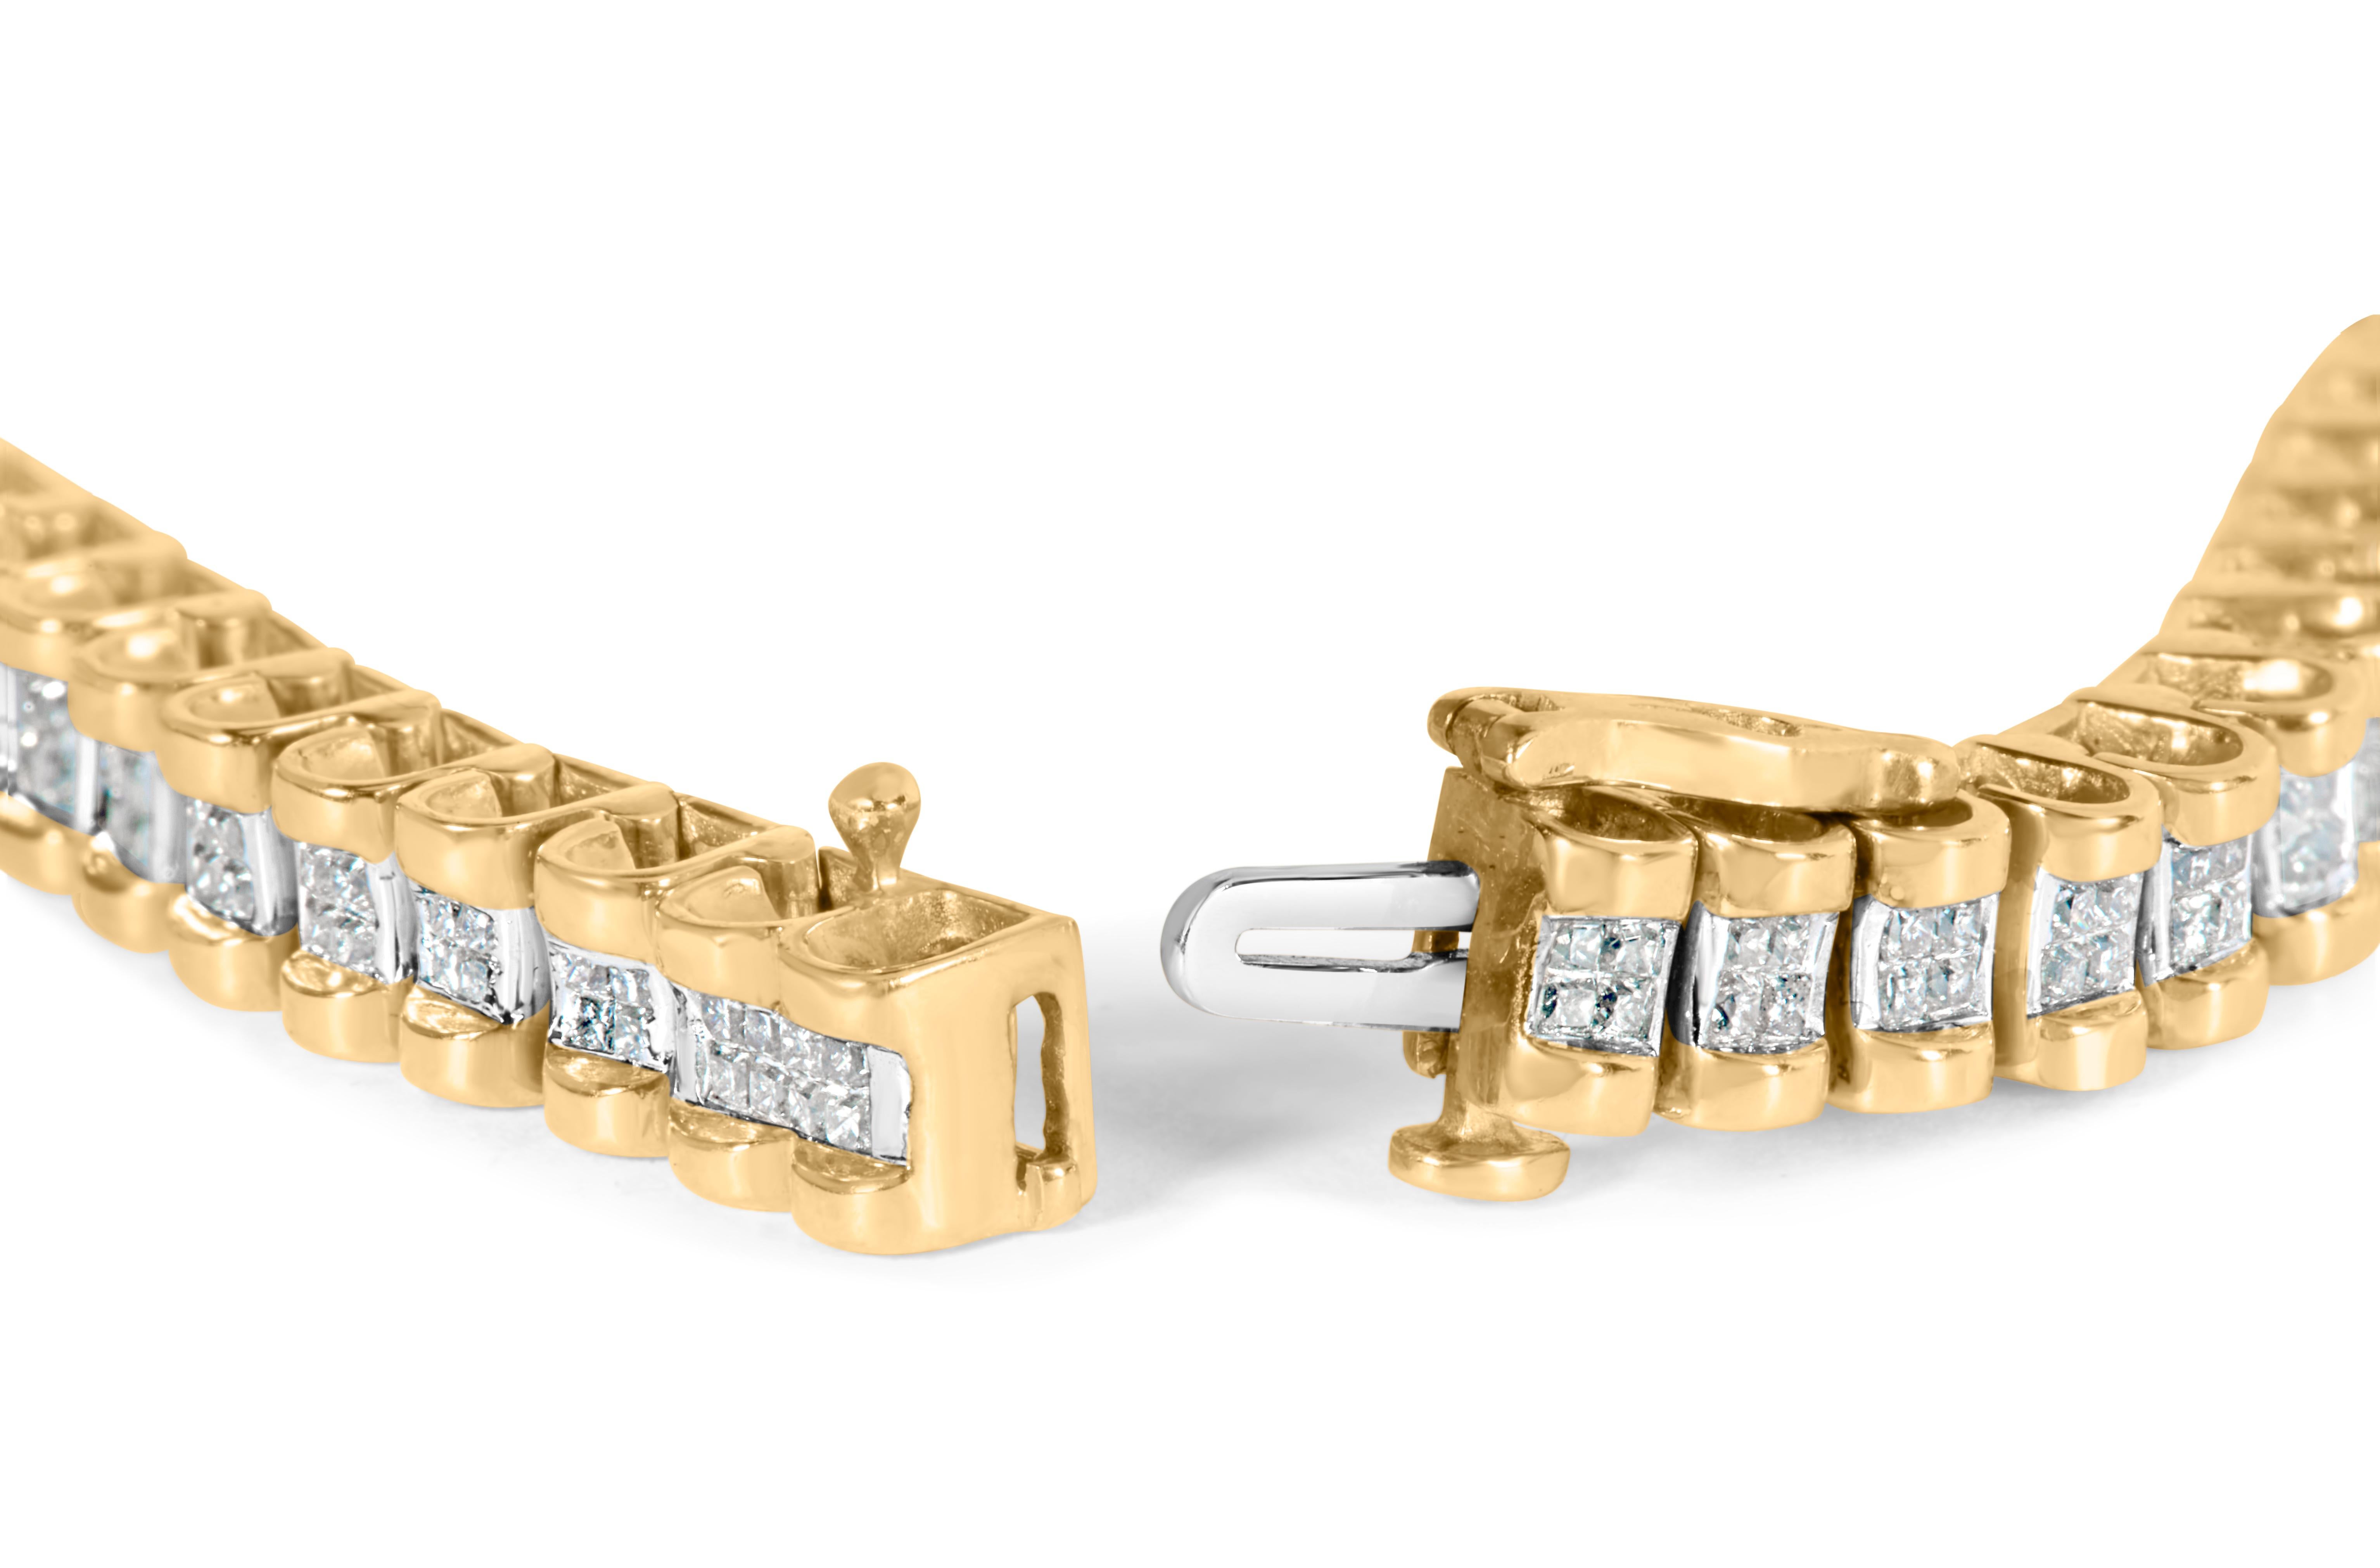 Make a statement with this stunning 14K yellow gold princess-cut diamond link bracelet. The 208 natural diamonds, totaling 2.0 cttw, sparkle brilliantly with their I-J color and I1-I2 clarity, making them the perfect addition to any outfit for any